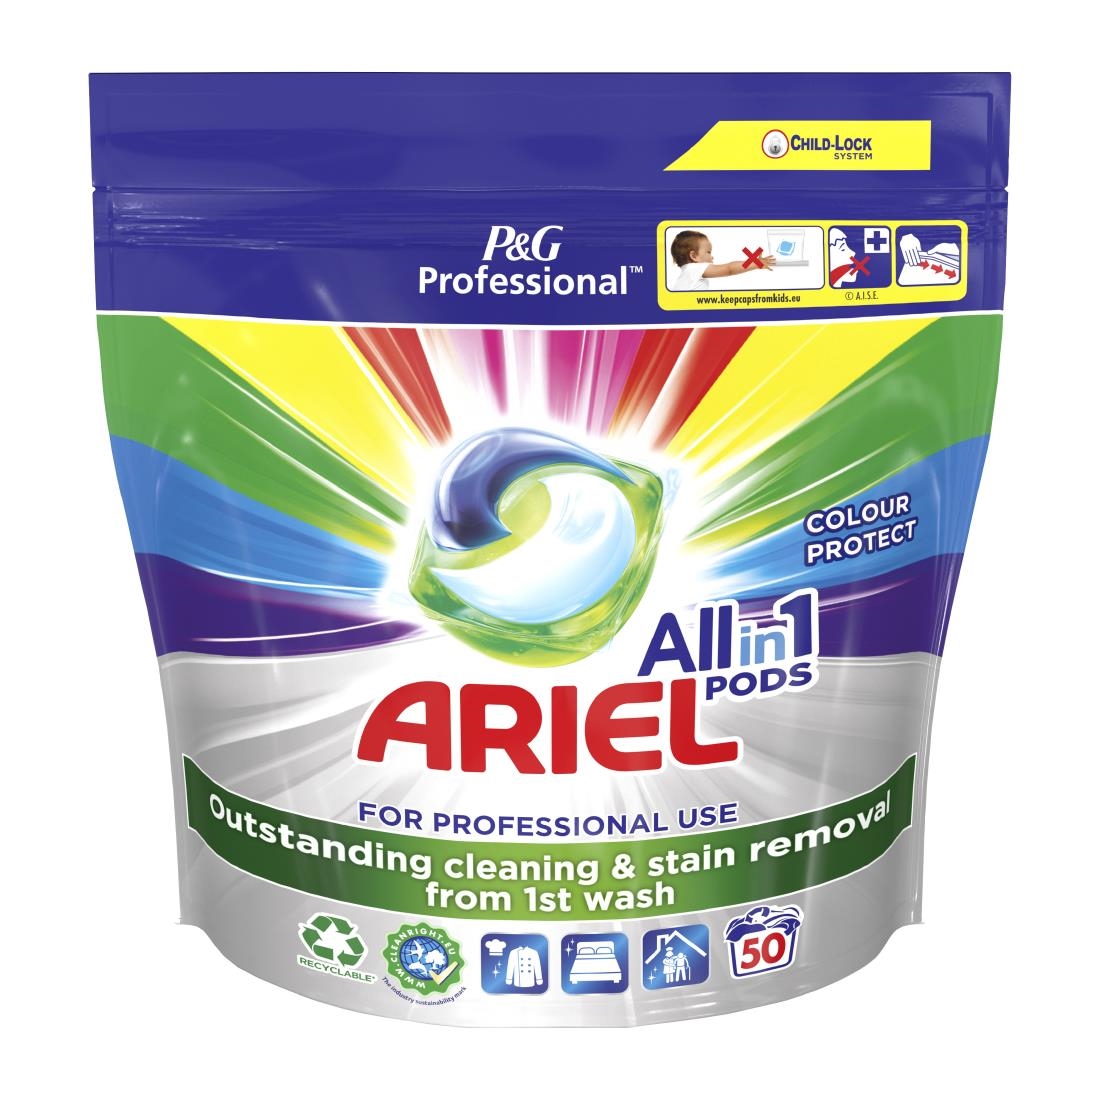 Ariel Professional All-In-1 Pods Washing Liquid Laundry Detergent Colour Pack of 100 (DZ457)